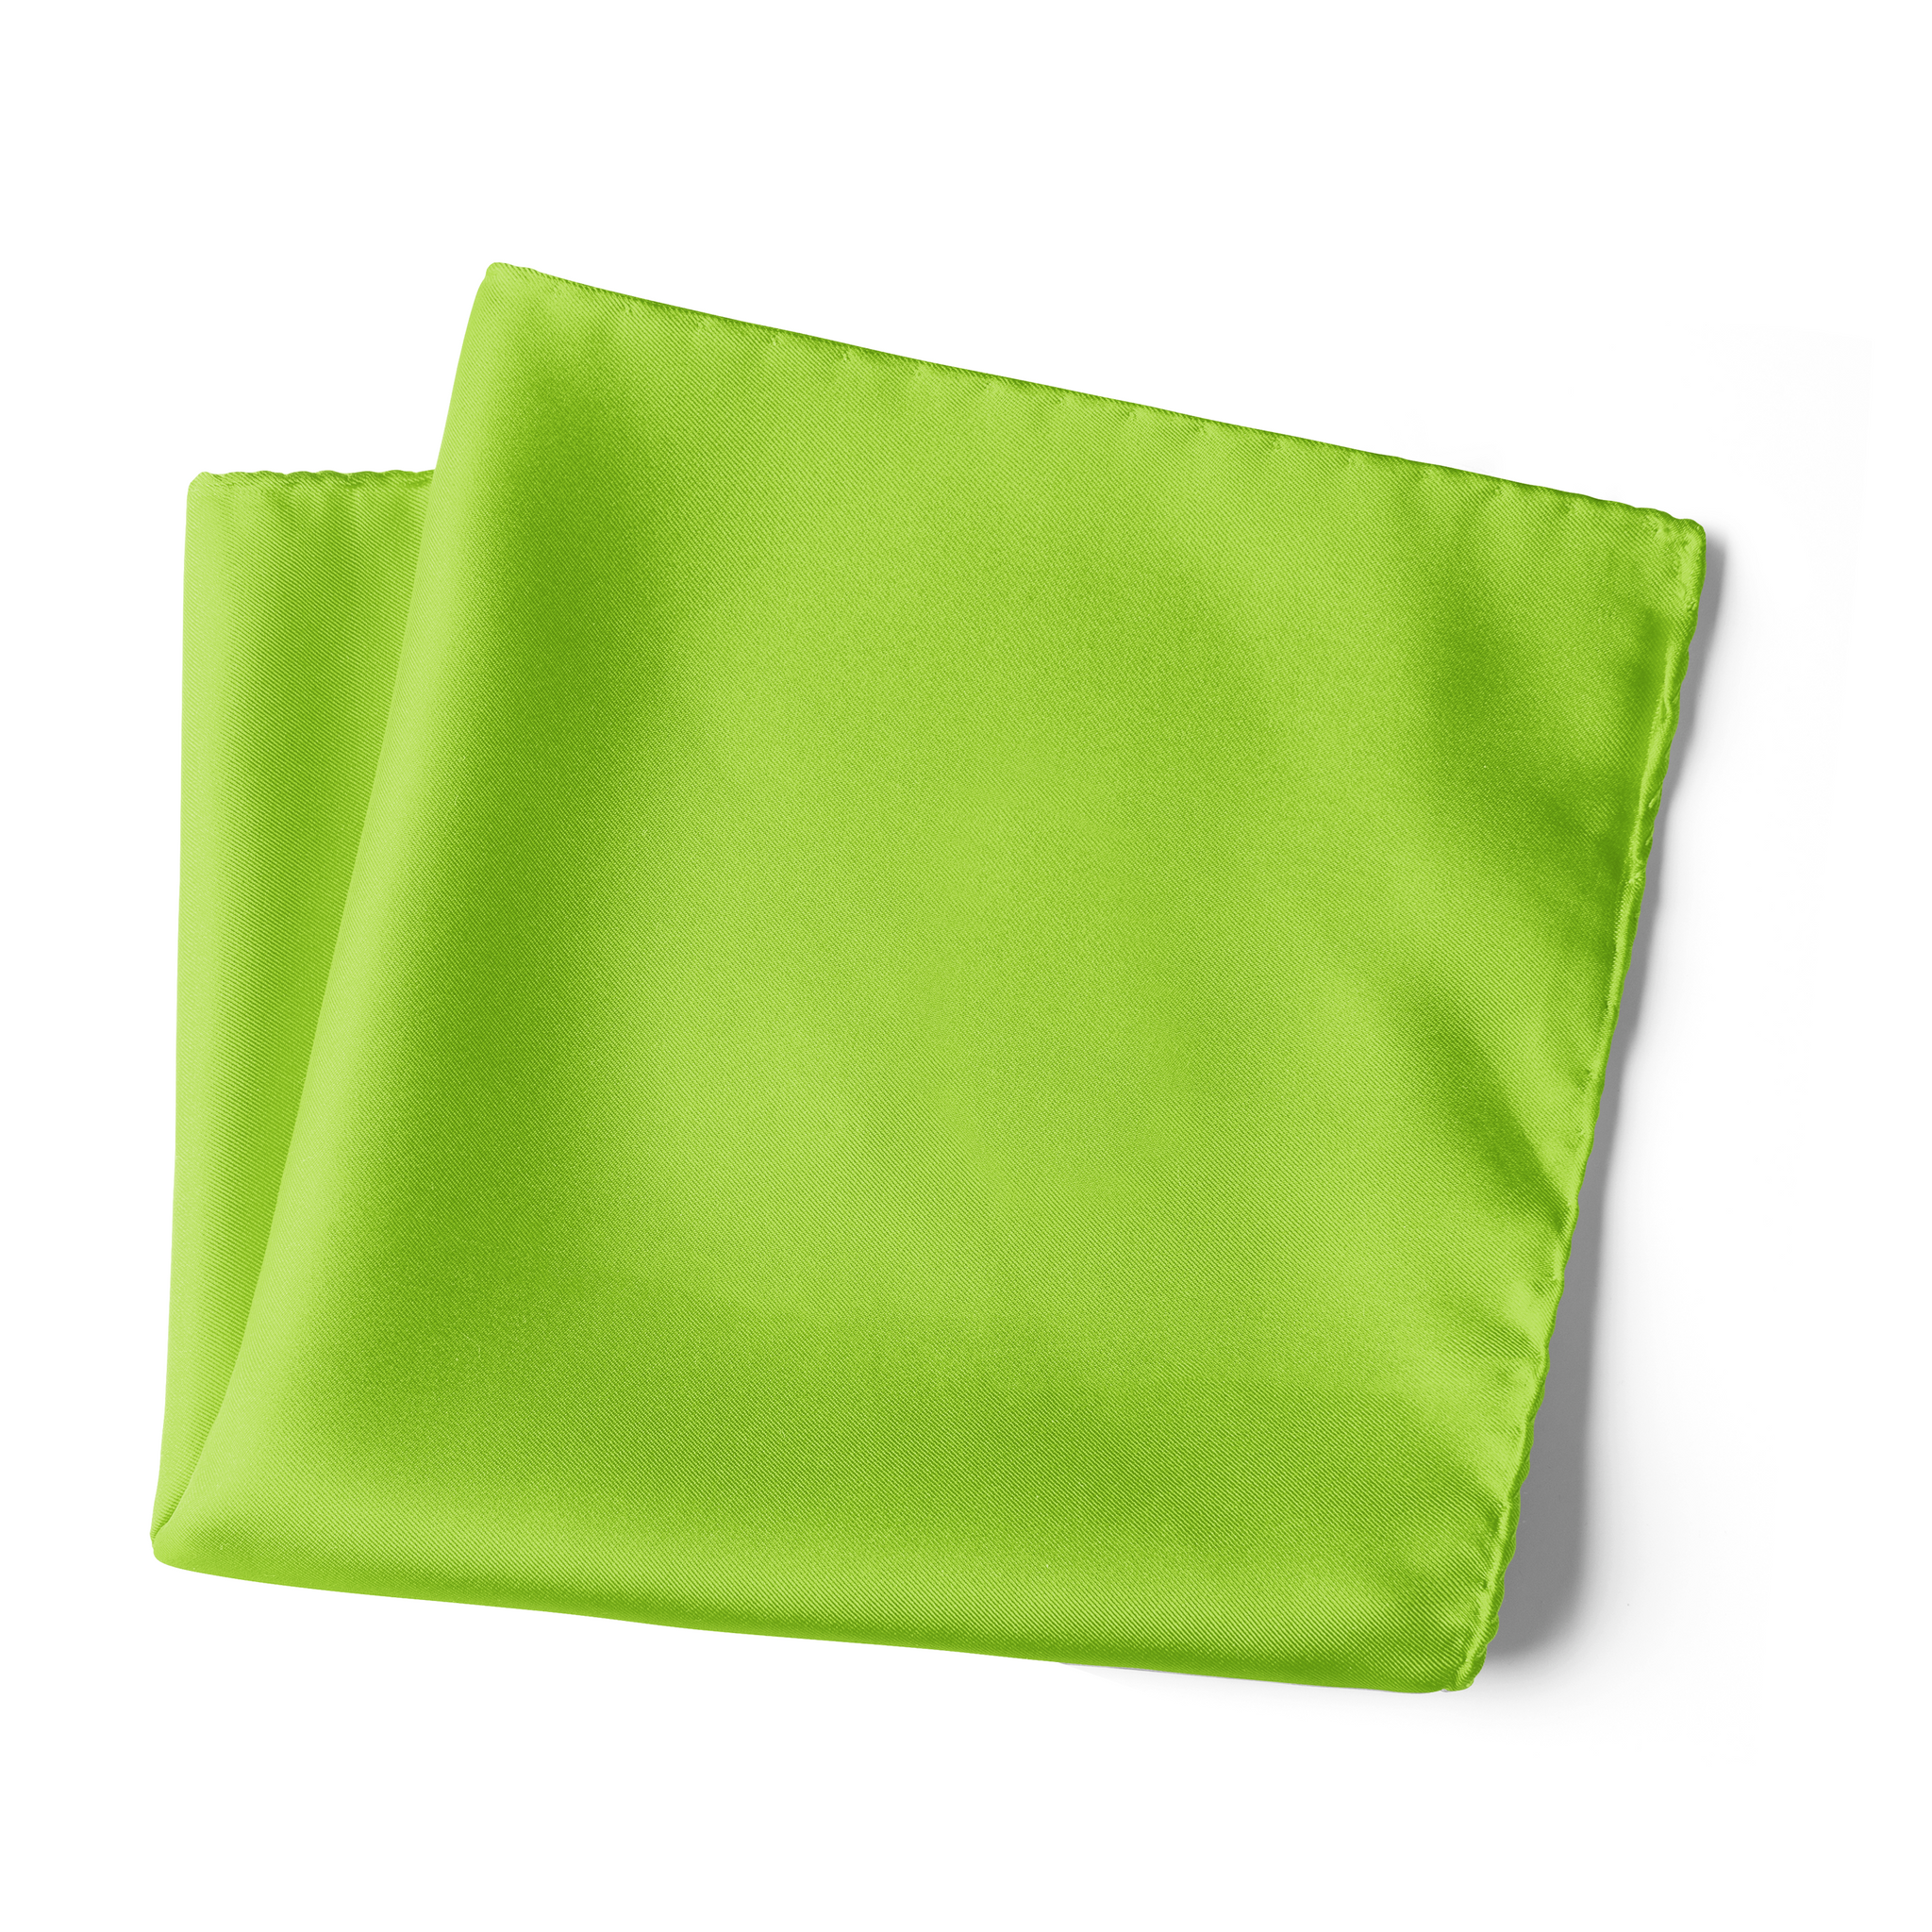 Chokore Bright Green Pure Silk Pocket Square, from the Solids Line